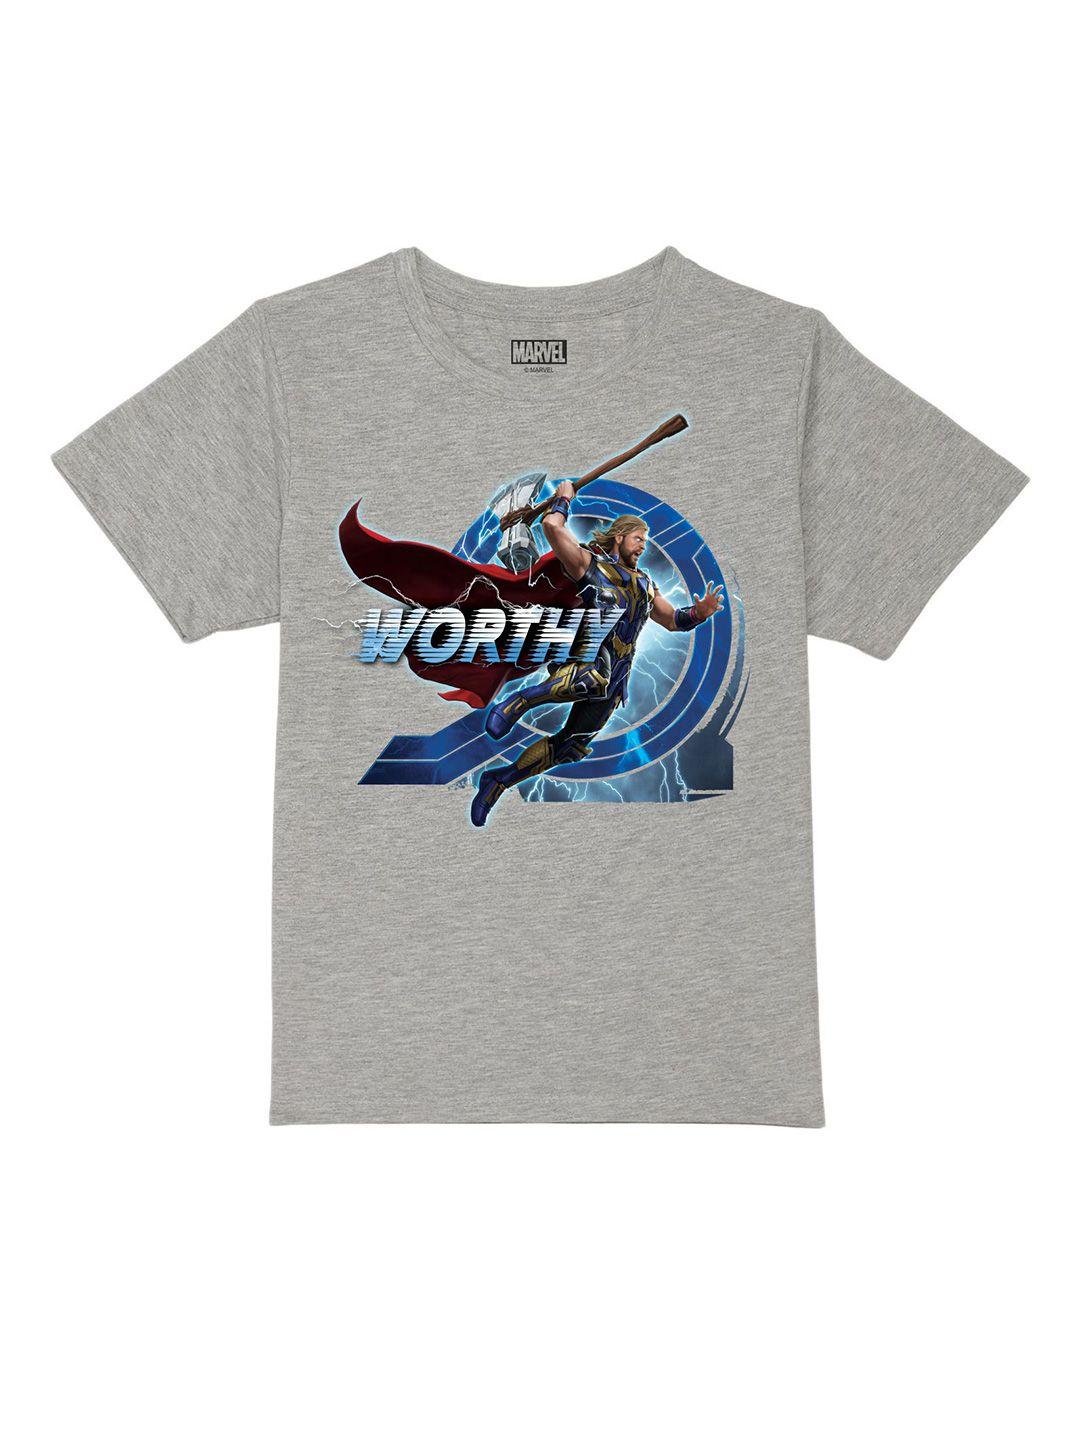 marvel by wear your mind boys grey printed t-shirt